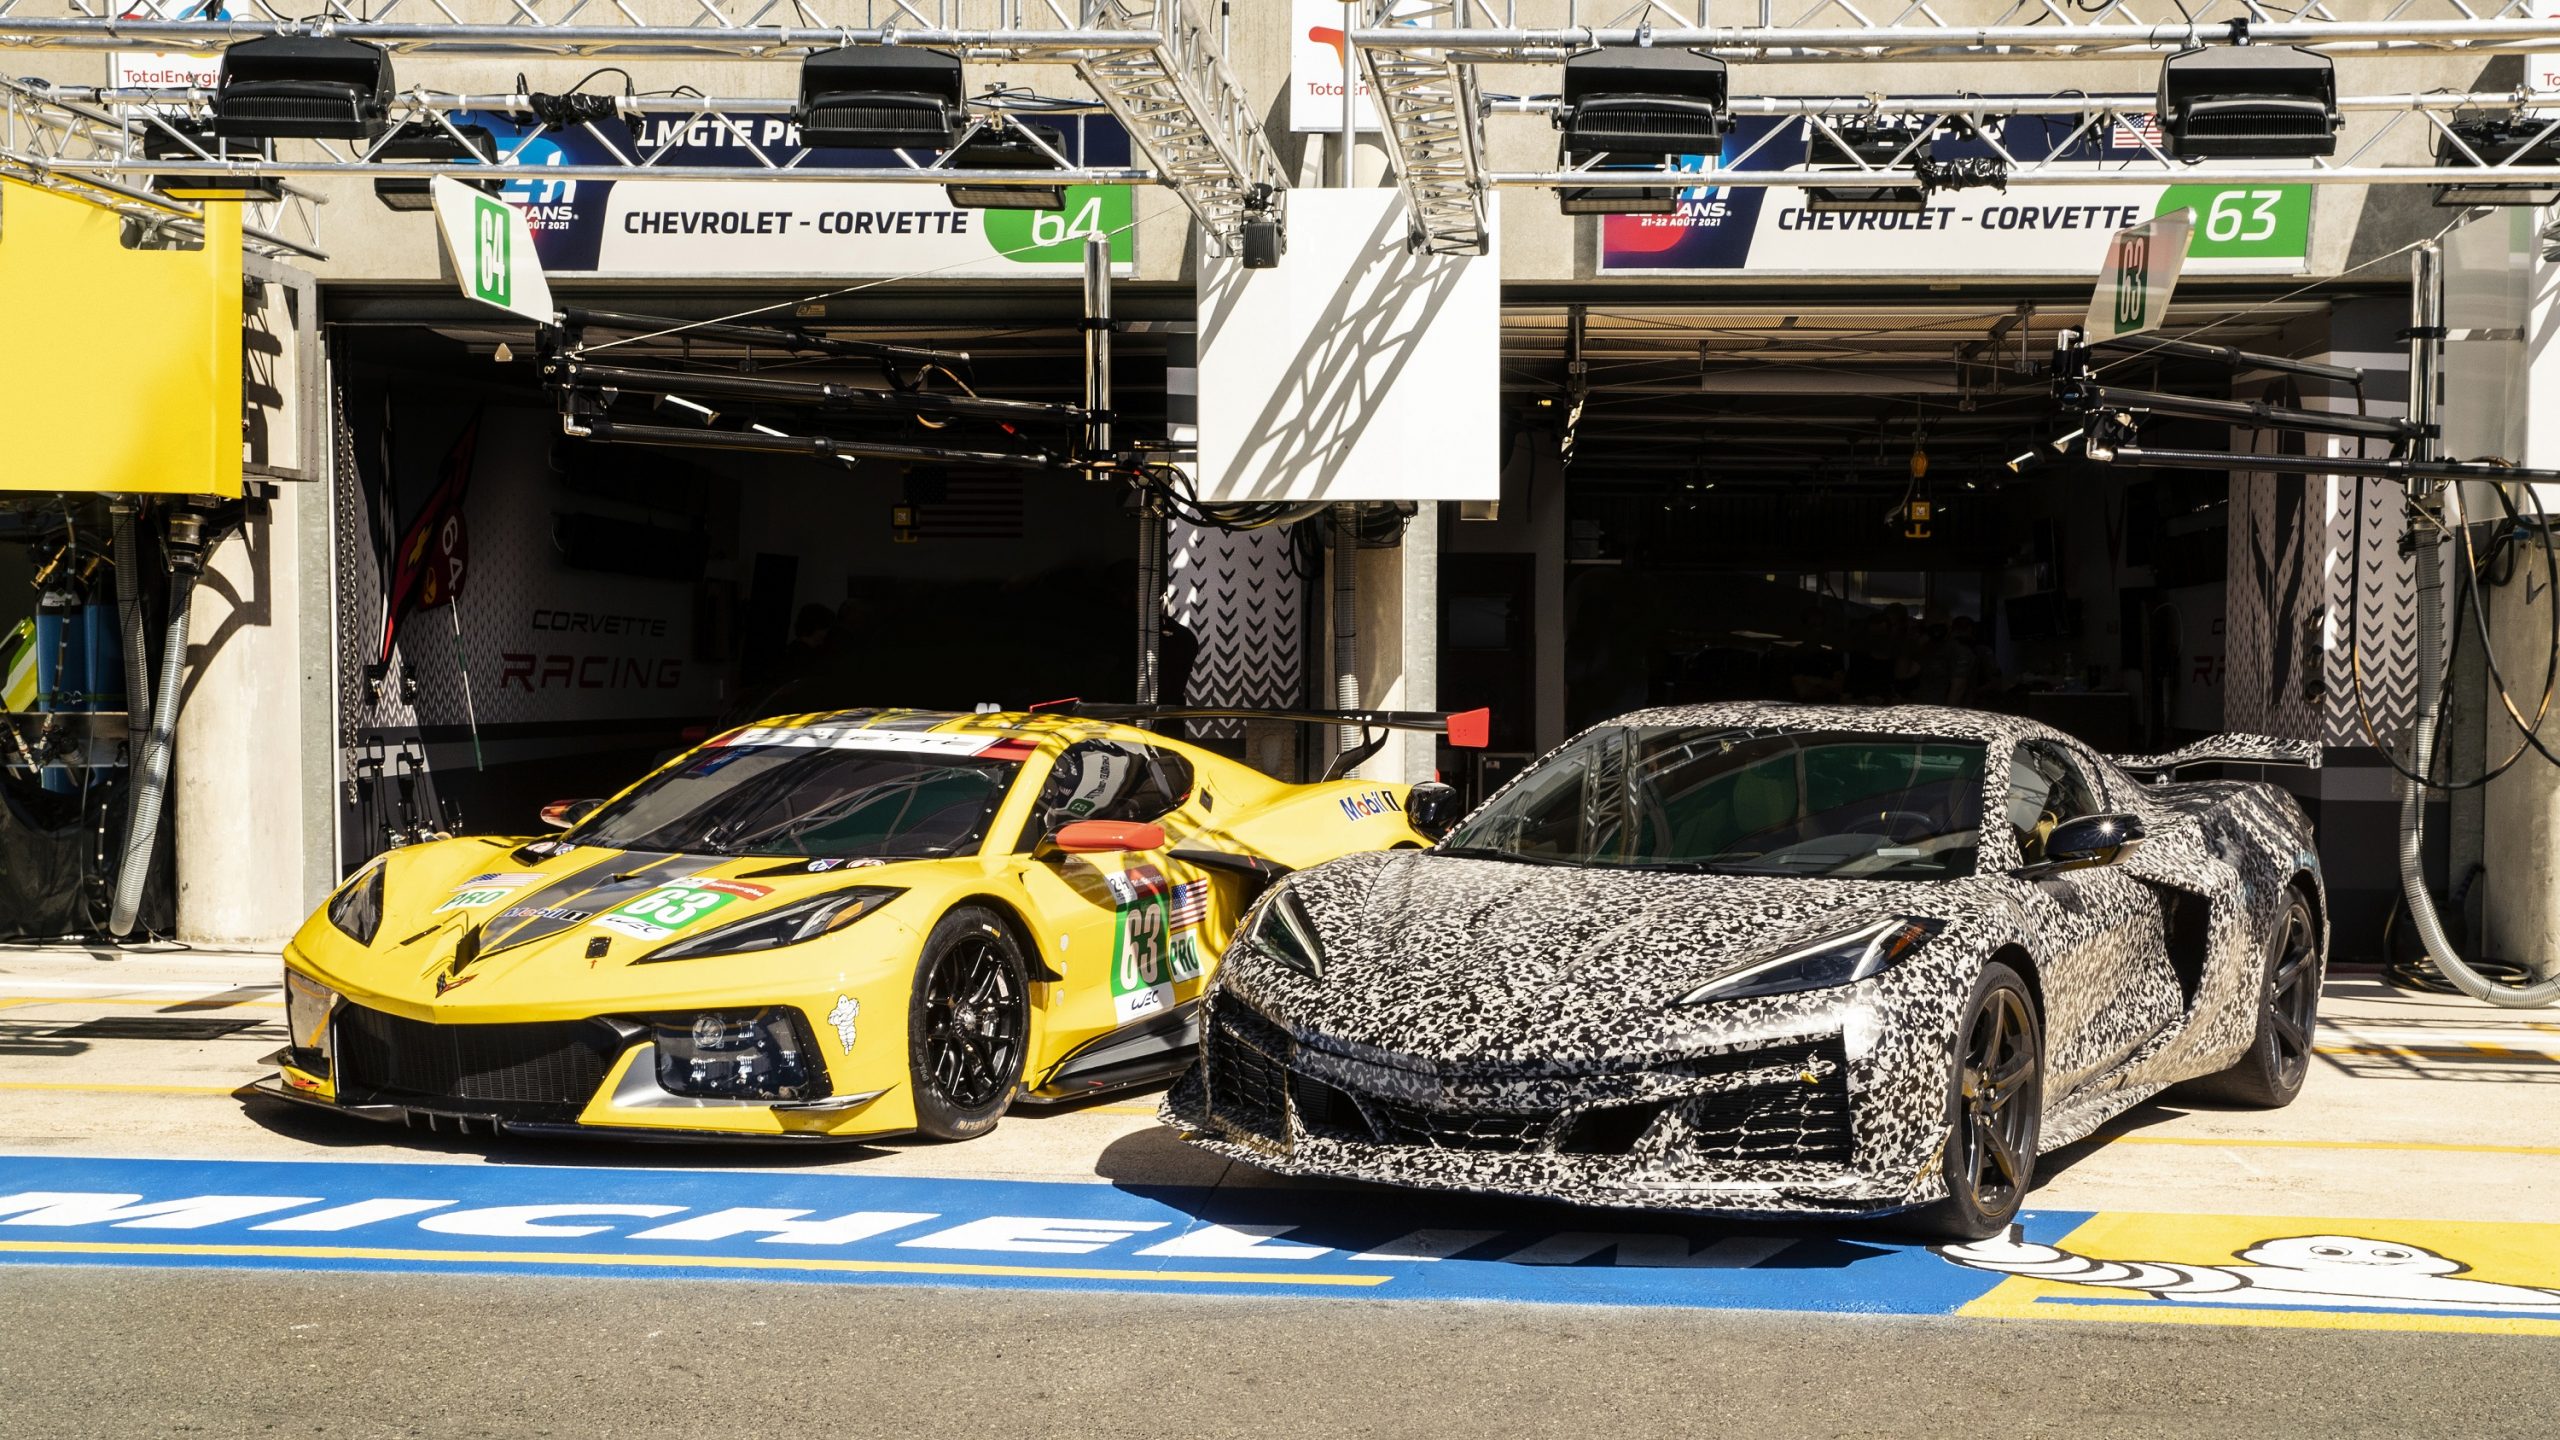 The camo livery Z06 next to the C8.R race car at Le Mans